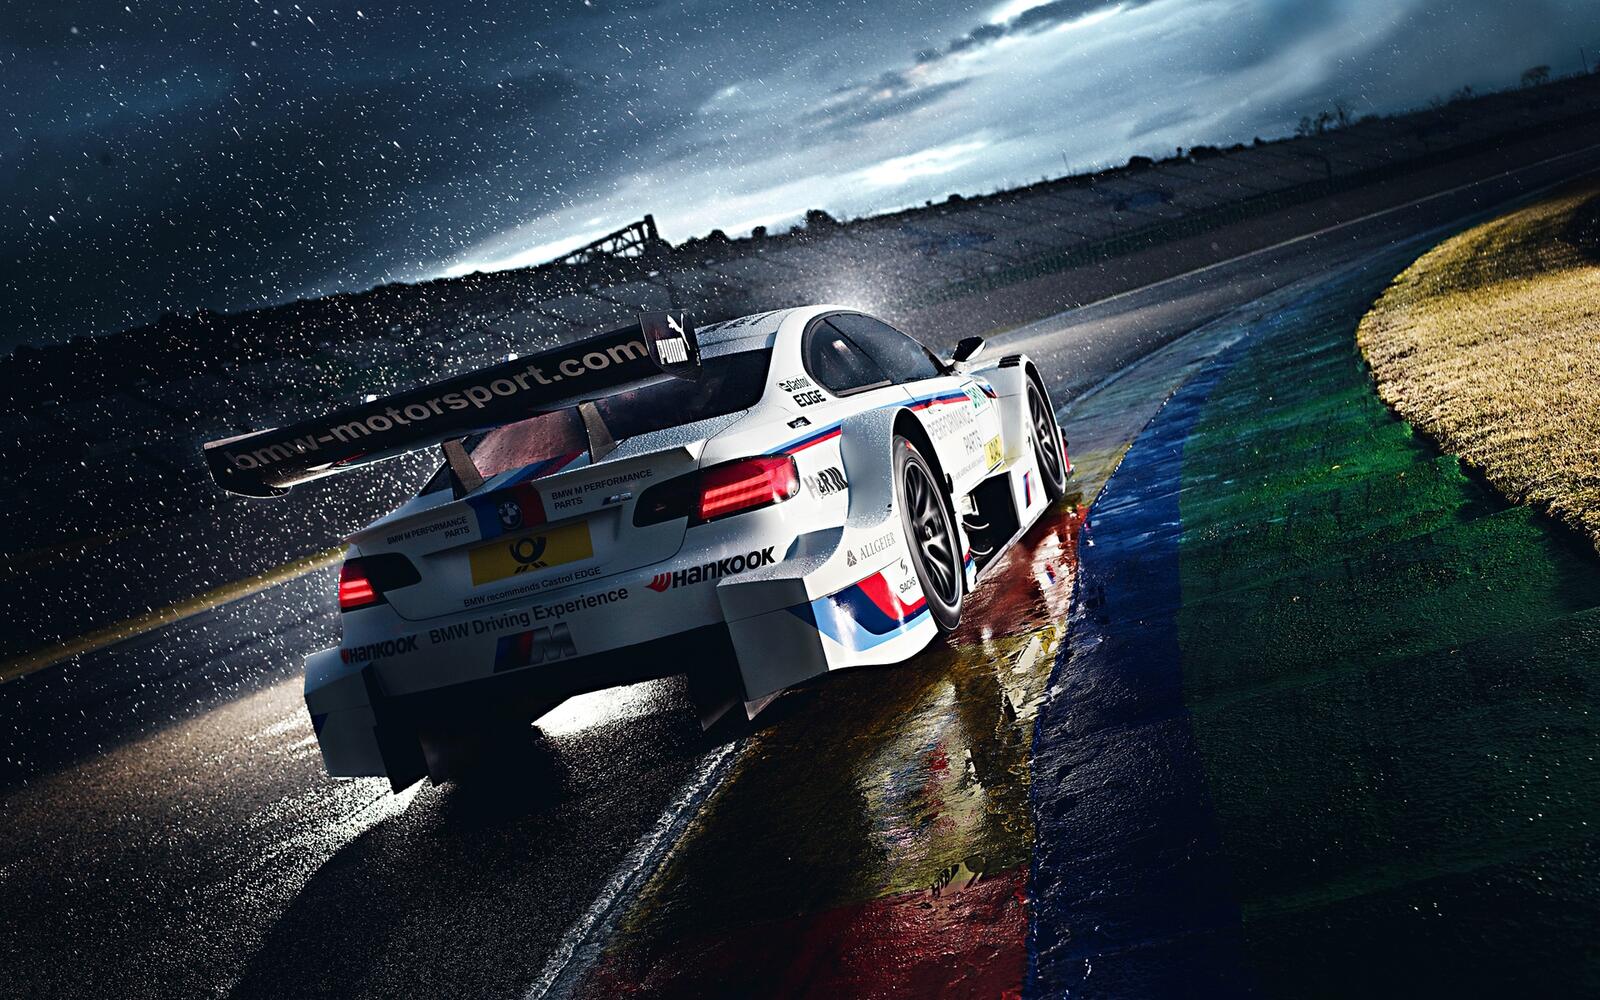 Free photo Bmw m3 on a sports track in rainy weather